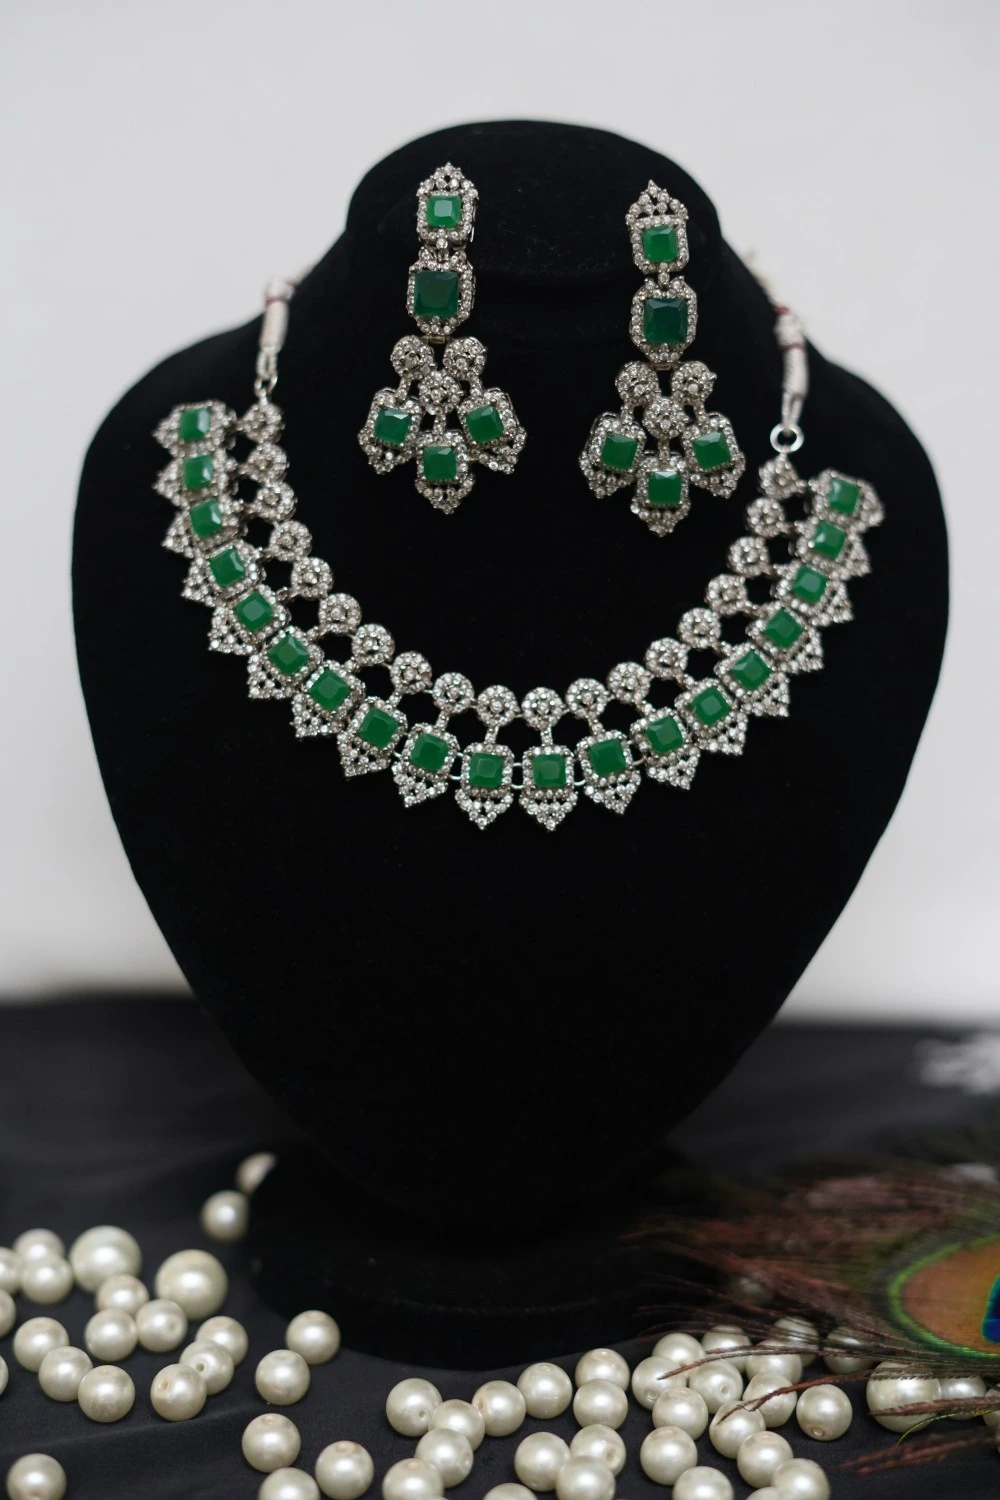 Necklace wIth earrings in light green color